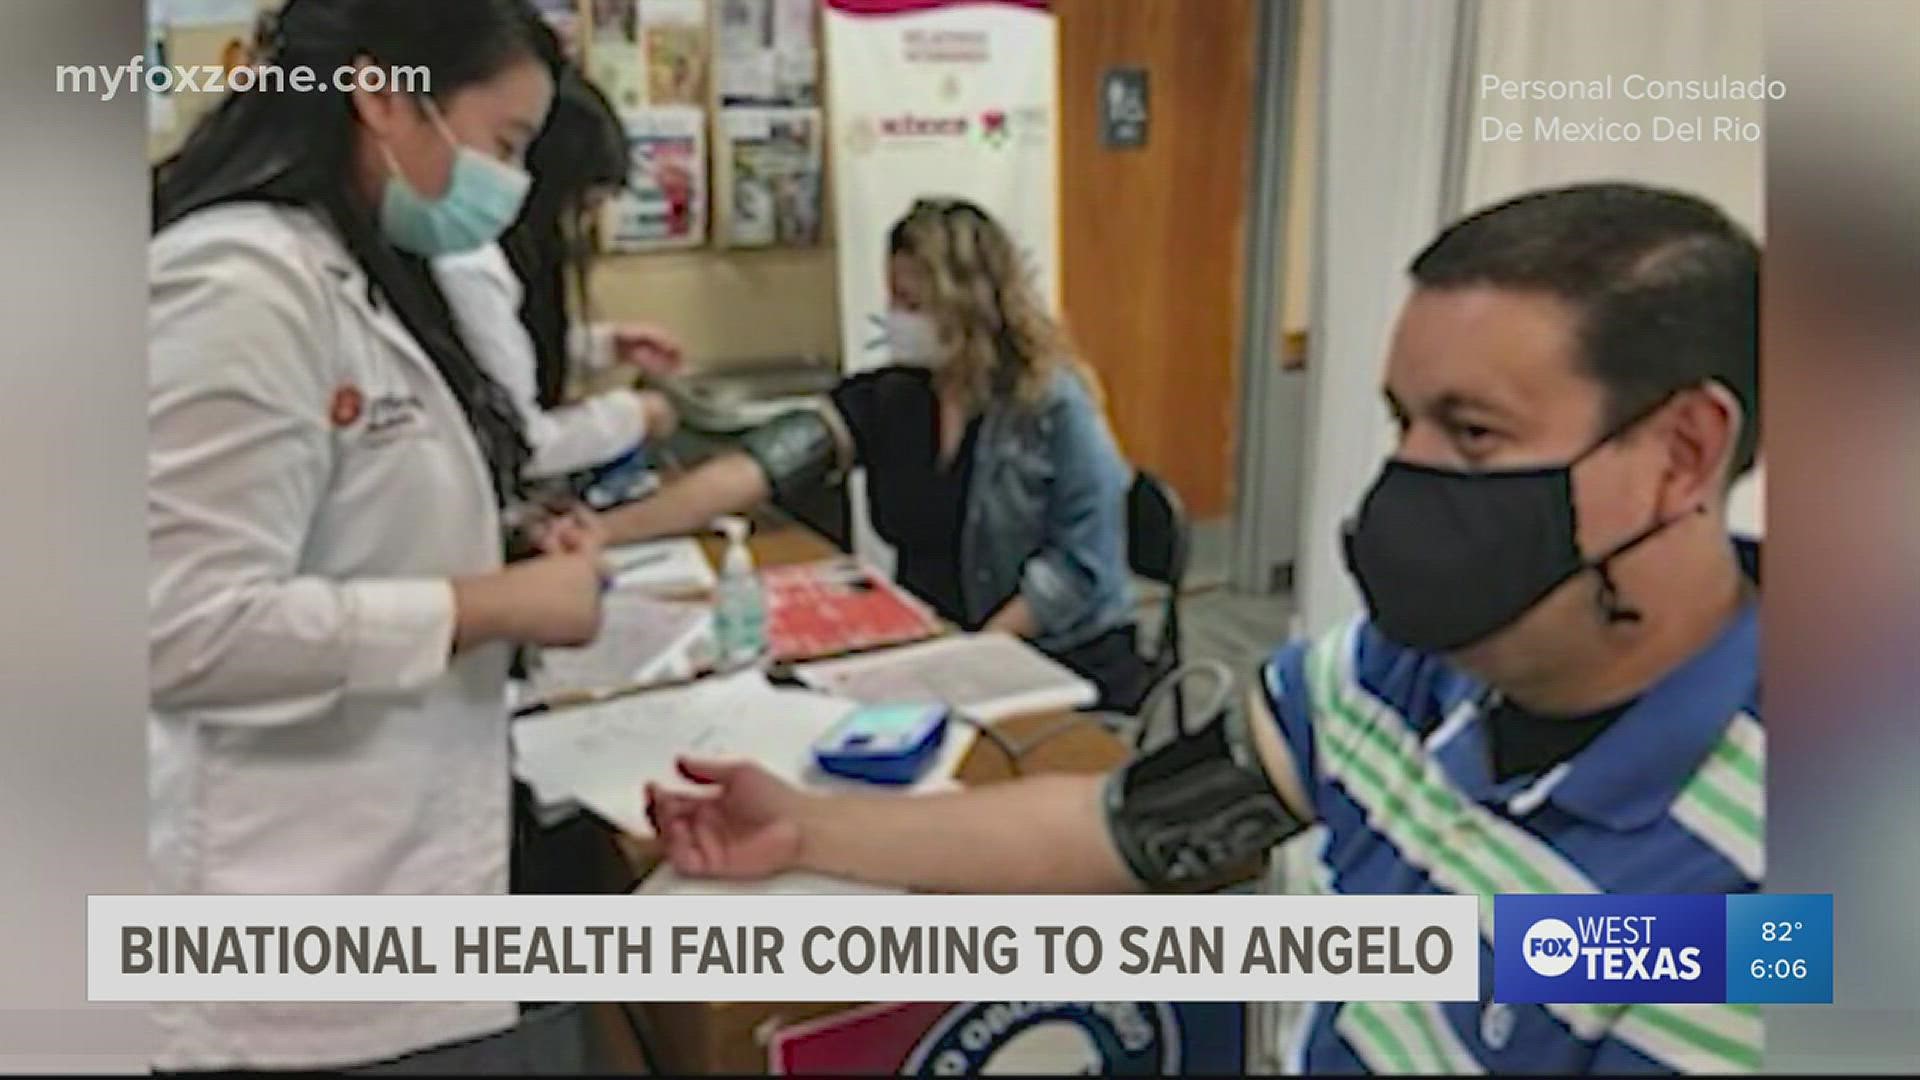 The Consulate of Mexico will offer several health screenings Saturday in San Angelo.